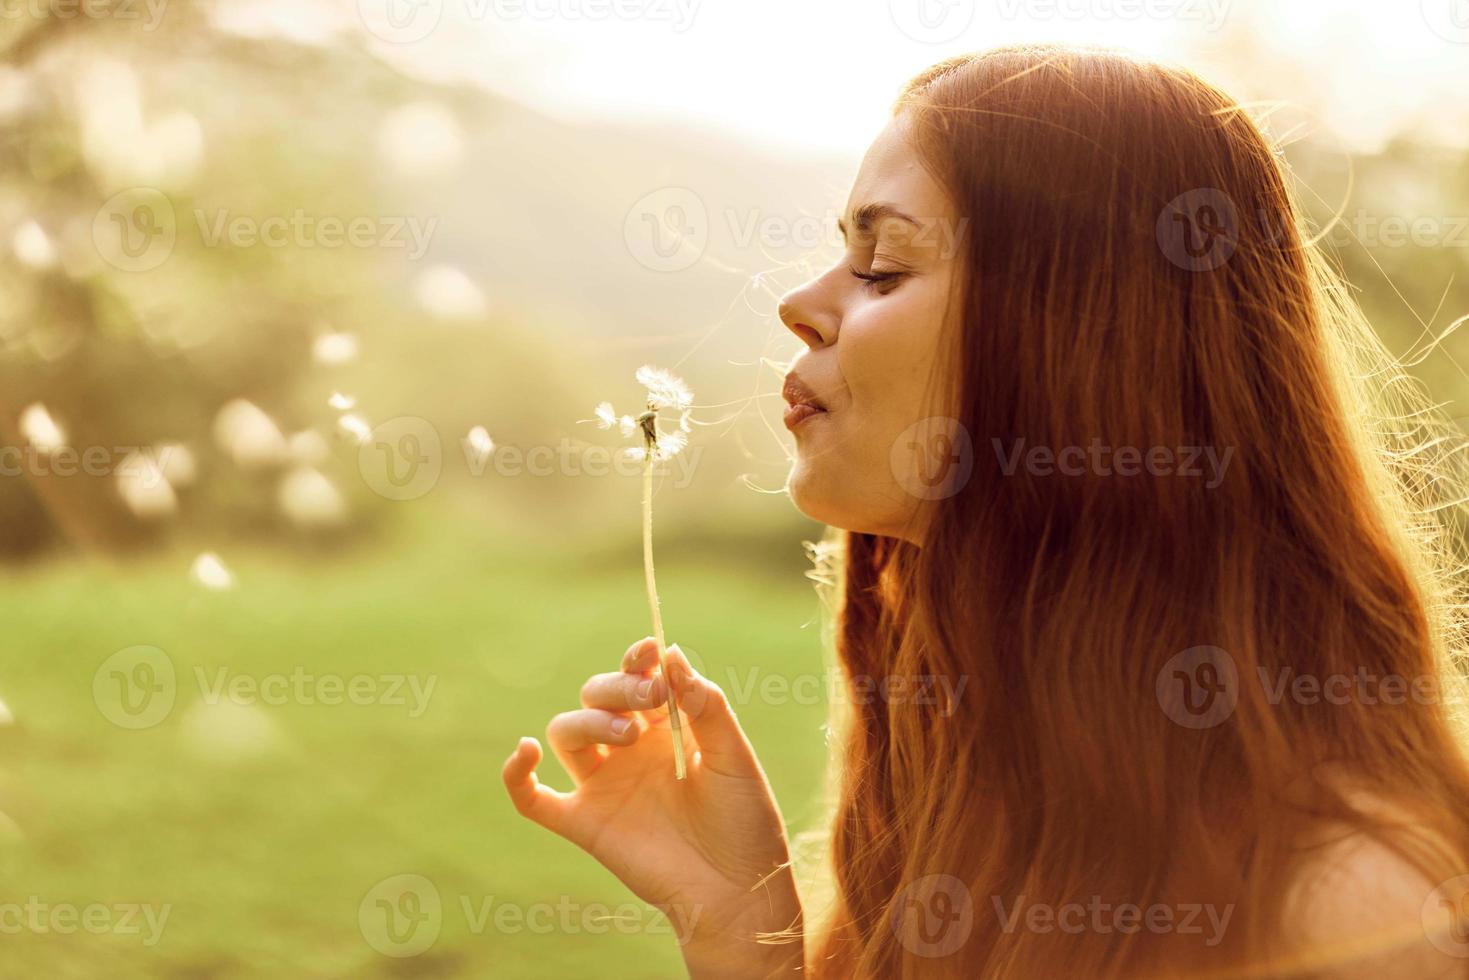 A young woman holds a dandelion in her hands and blows on it, the seeds of the dandelion fly through the air to grow new flowers. Caring for the Earth's Ecology photo